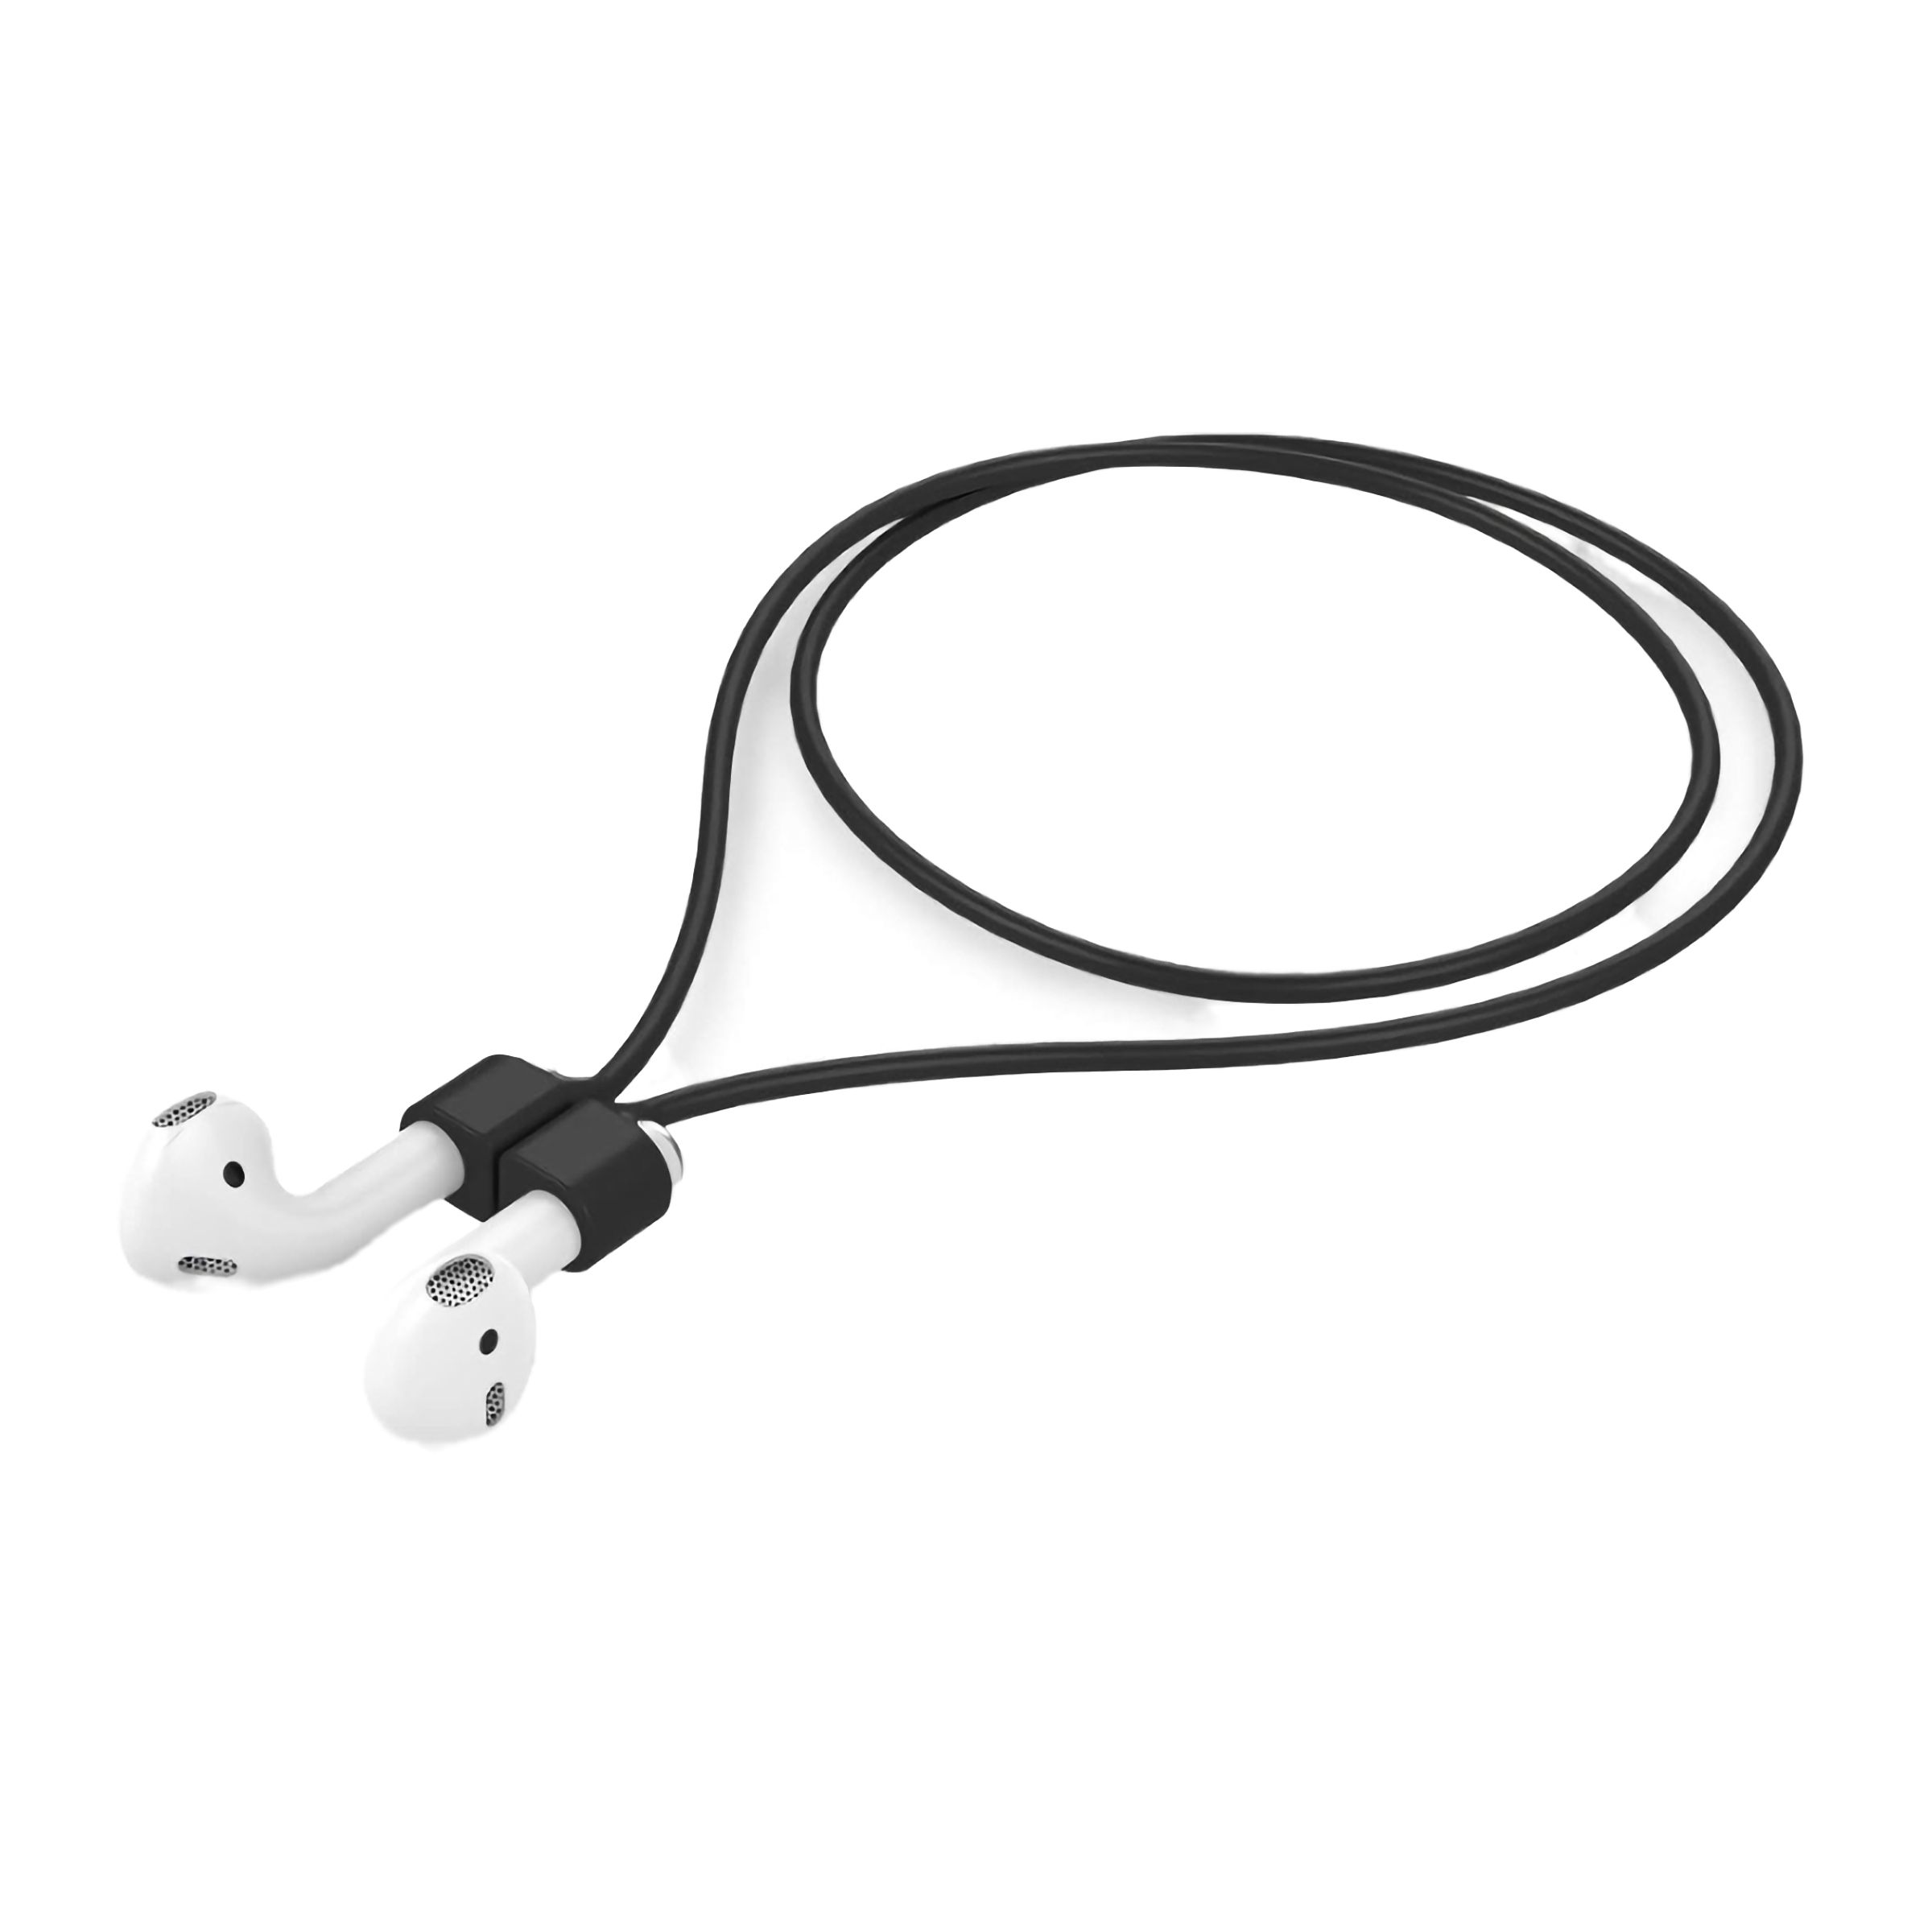 A black cord attached to two AirPods stuck together.